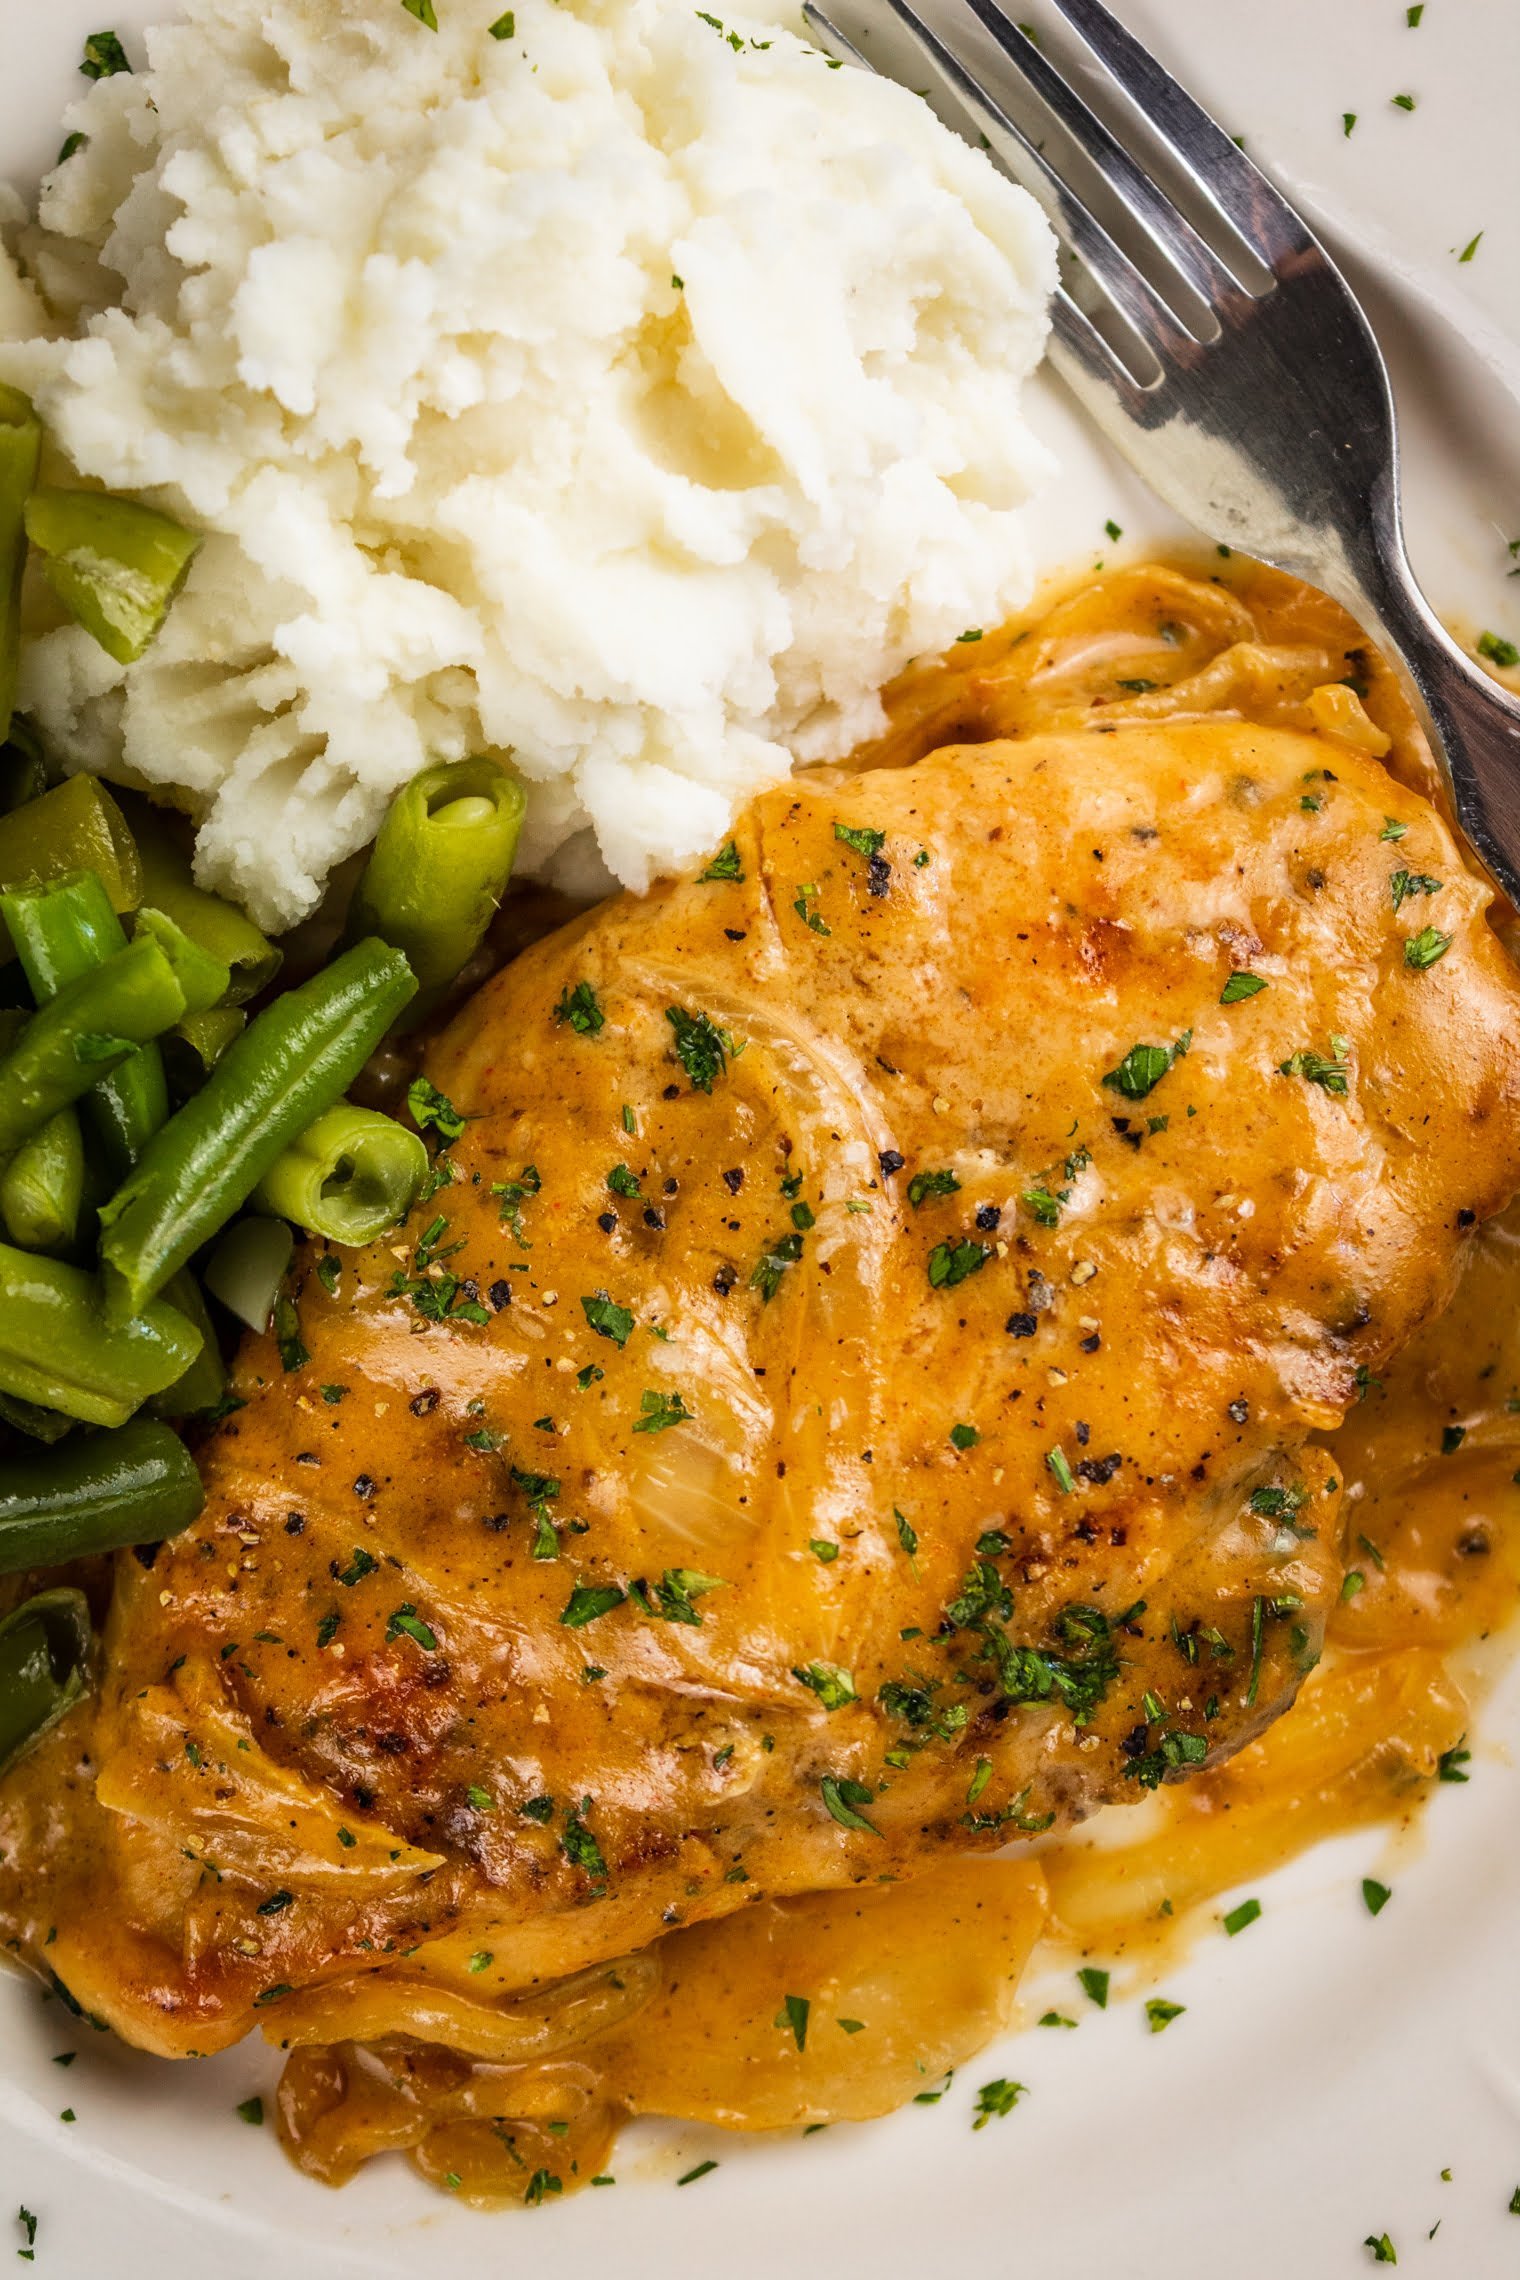 Southern Smothered Chicken with Gravy - Comfortable Food